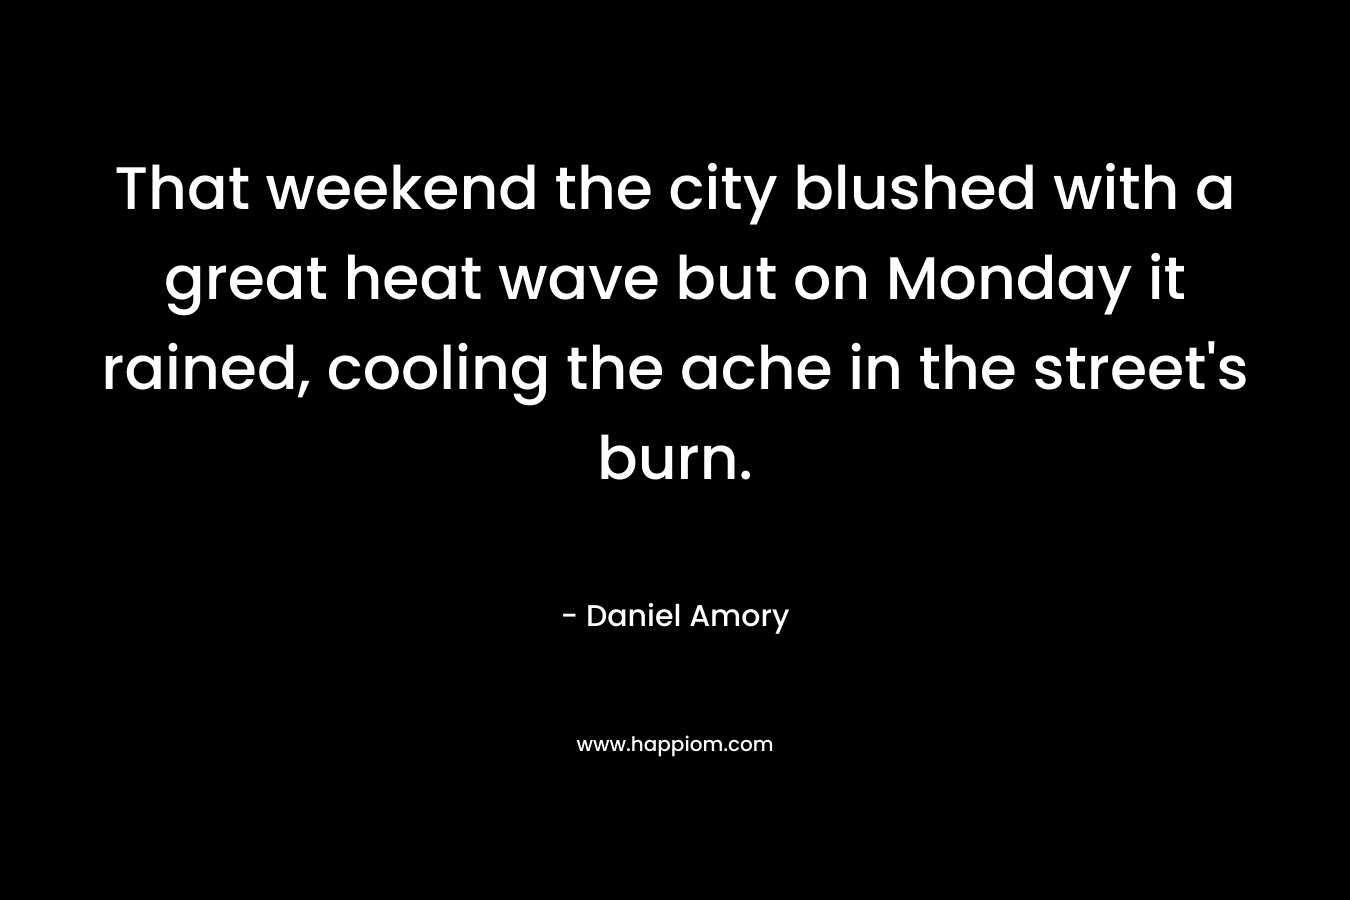 That weekend the city blushed with a great heat wave but on Monday it rained, cooling the ache in the street’s burn. – Daniel Amory